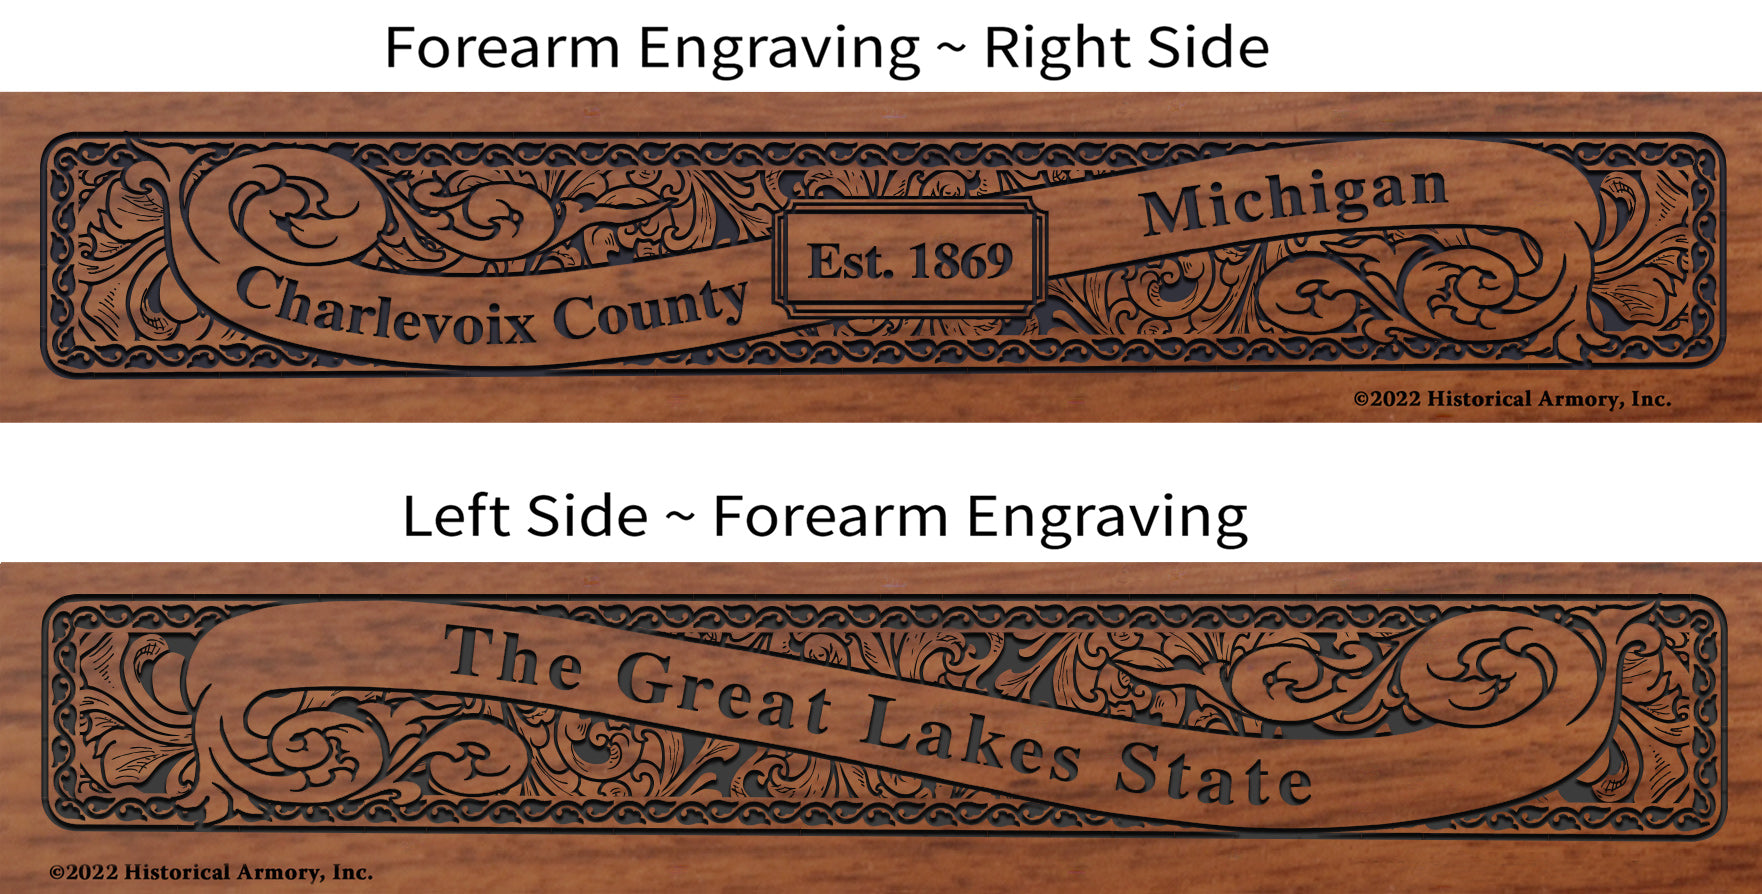 Charlevoix County Michigan Engraved Rifle Forearm